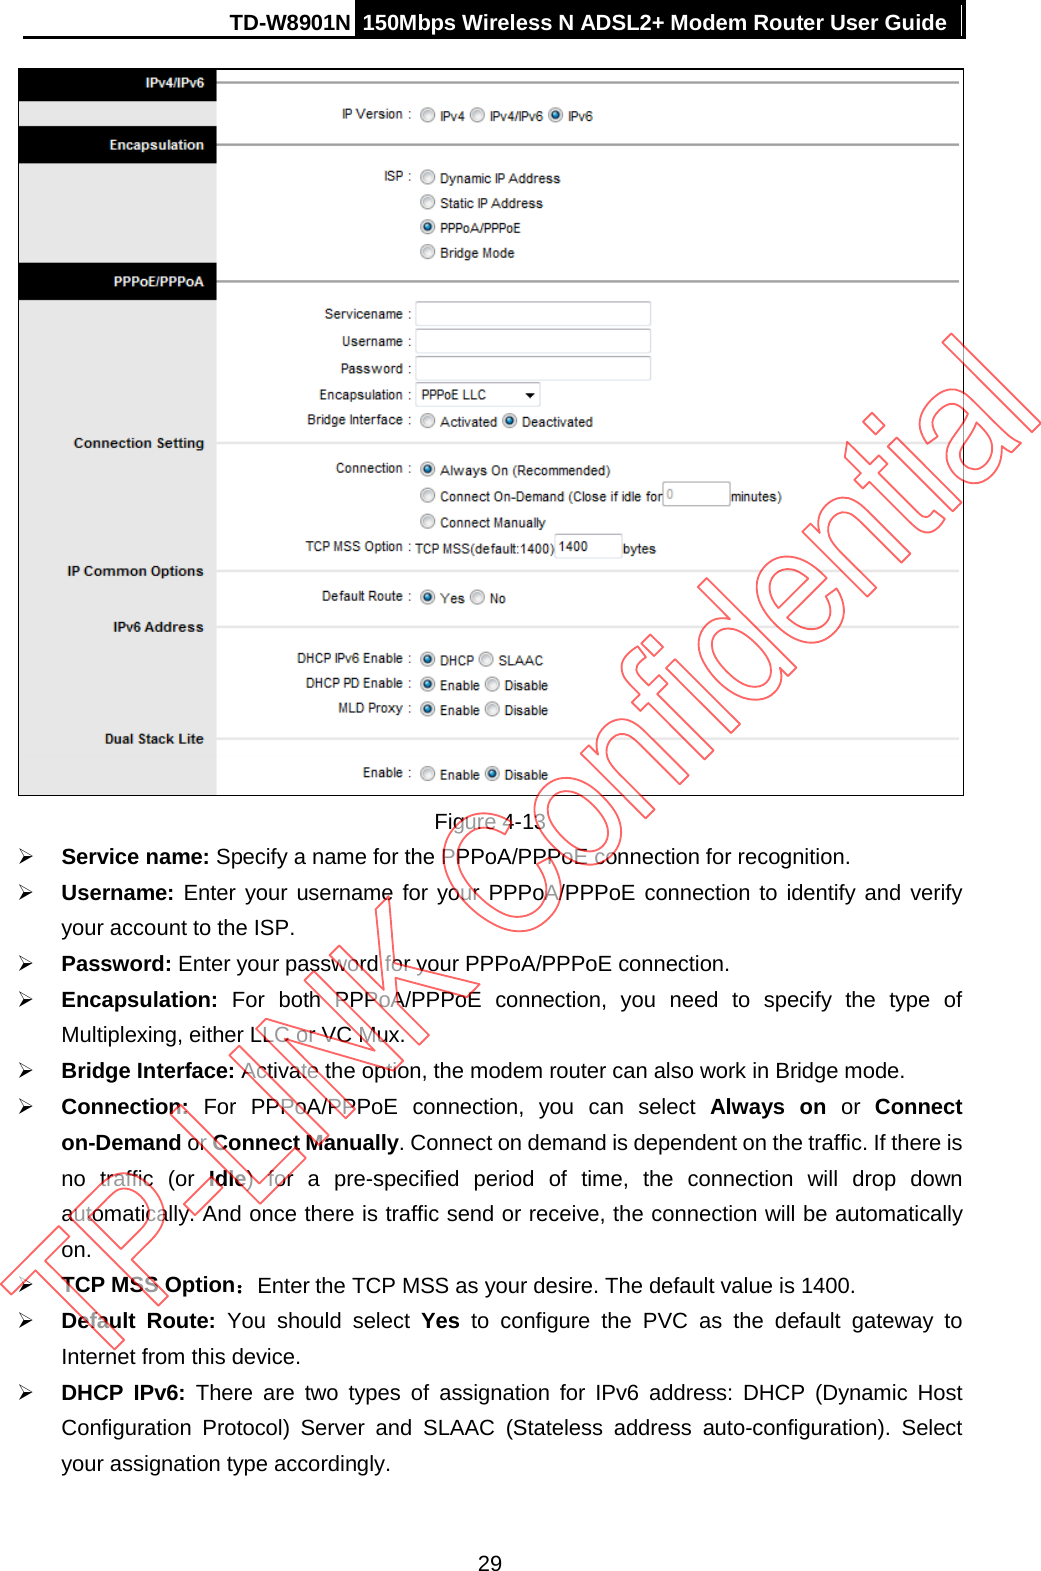 TD-W8901N 150Mbps Wireless N ADSL2+ Modem Router User Guide   Figure 4-13  Service name: Specify a name for the PPPoA/PPPoE connection for recognition.    Username: Enter your username for your PPPoA/PPPoE connection to identify and verify your account to the ISP.  Password: Enter your password for your PPPoA/PPPoE connection.  Encapsulation:  For both PPPoA/PPPoE connection, you need to specify the type of Multiplexing, either LLC or VC Mux.  Bridge Interface: Activate the option, the modem router can also work in Bridge mode.  Connection: For PPPoA/PPPoE connection, you can select Always on or  Connect on-Demand or Connect Manually. Connect on demand is dependent on the traffic. If there is no traffic (or Idle) for a pre-specified period of time, the connection will drop down automatically. And once there is traffic send or receive, the connection will be automatically on.  TCP MSS Option：Enter the TCP MSS as your desire. The default value is 1400.  Default Route: You should select Yes to configure the PVC as the default gateway to Internet from this device.  DHCP IPv6: There are two types of assignation for IPv6 address: DHCP (Dynamic Host Configuration Protocol) Server and SLAAC (Stateless address auto-configuration). Select your assignation type accordingly. 29 